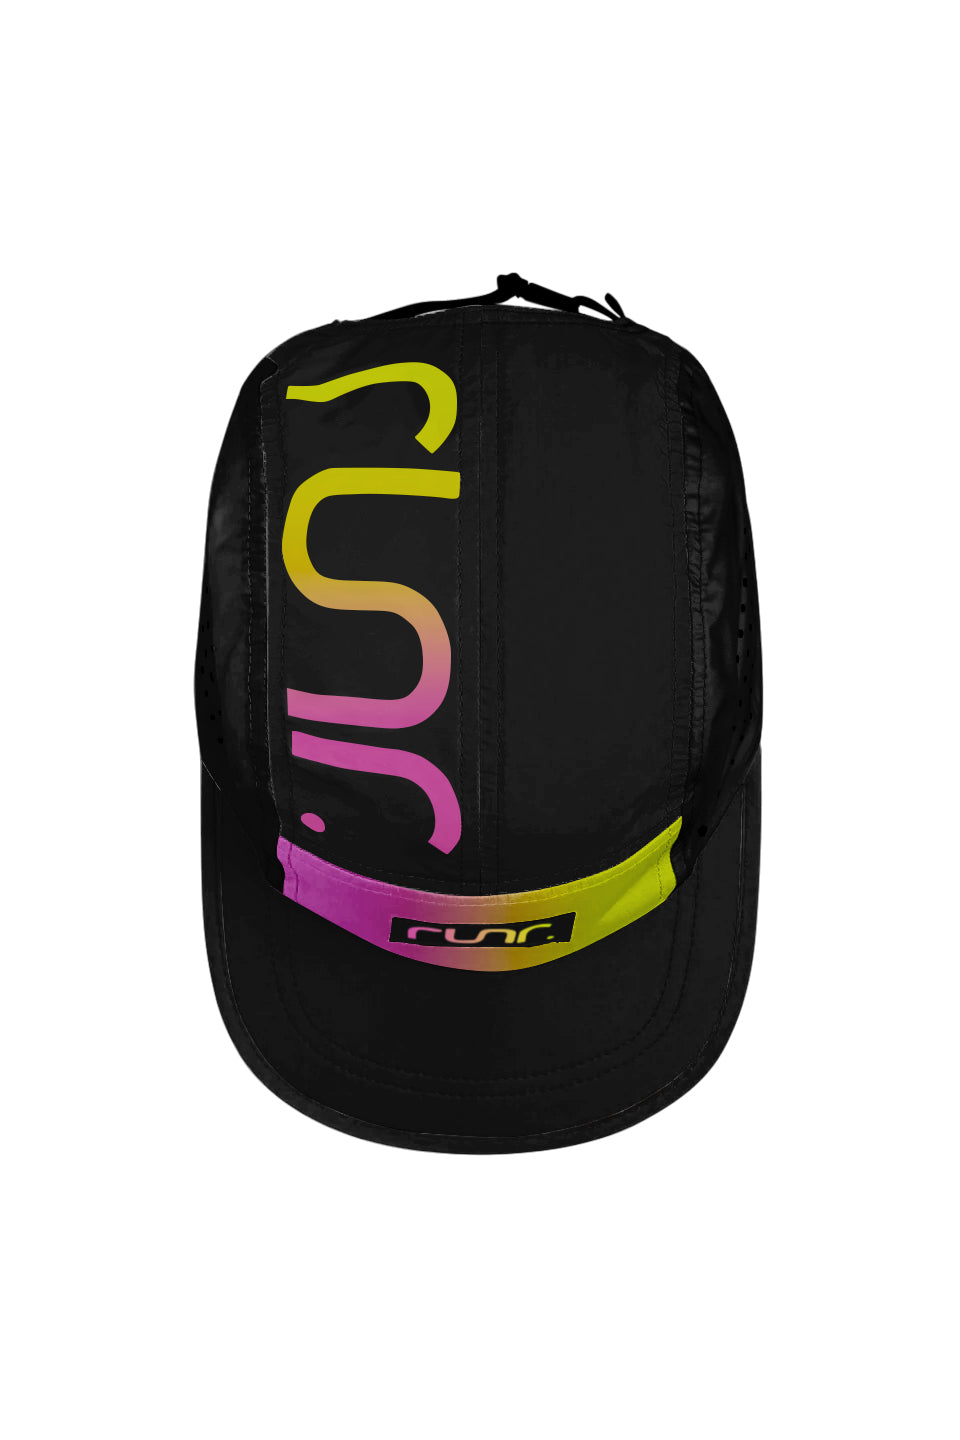 Runr New Mexico Technical Running Hat